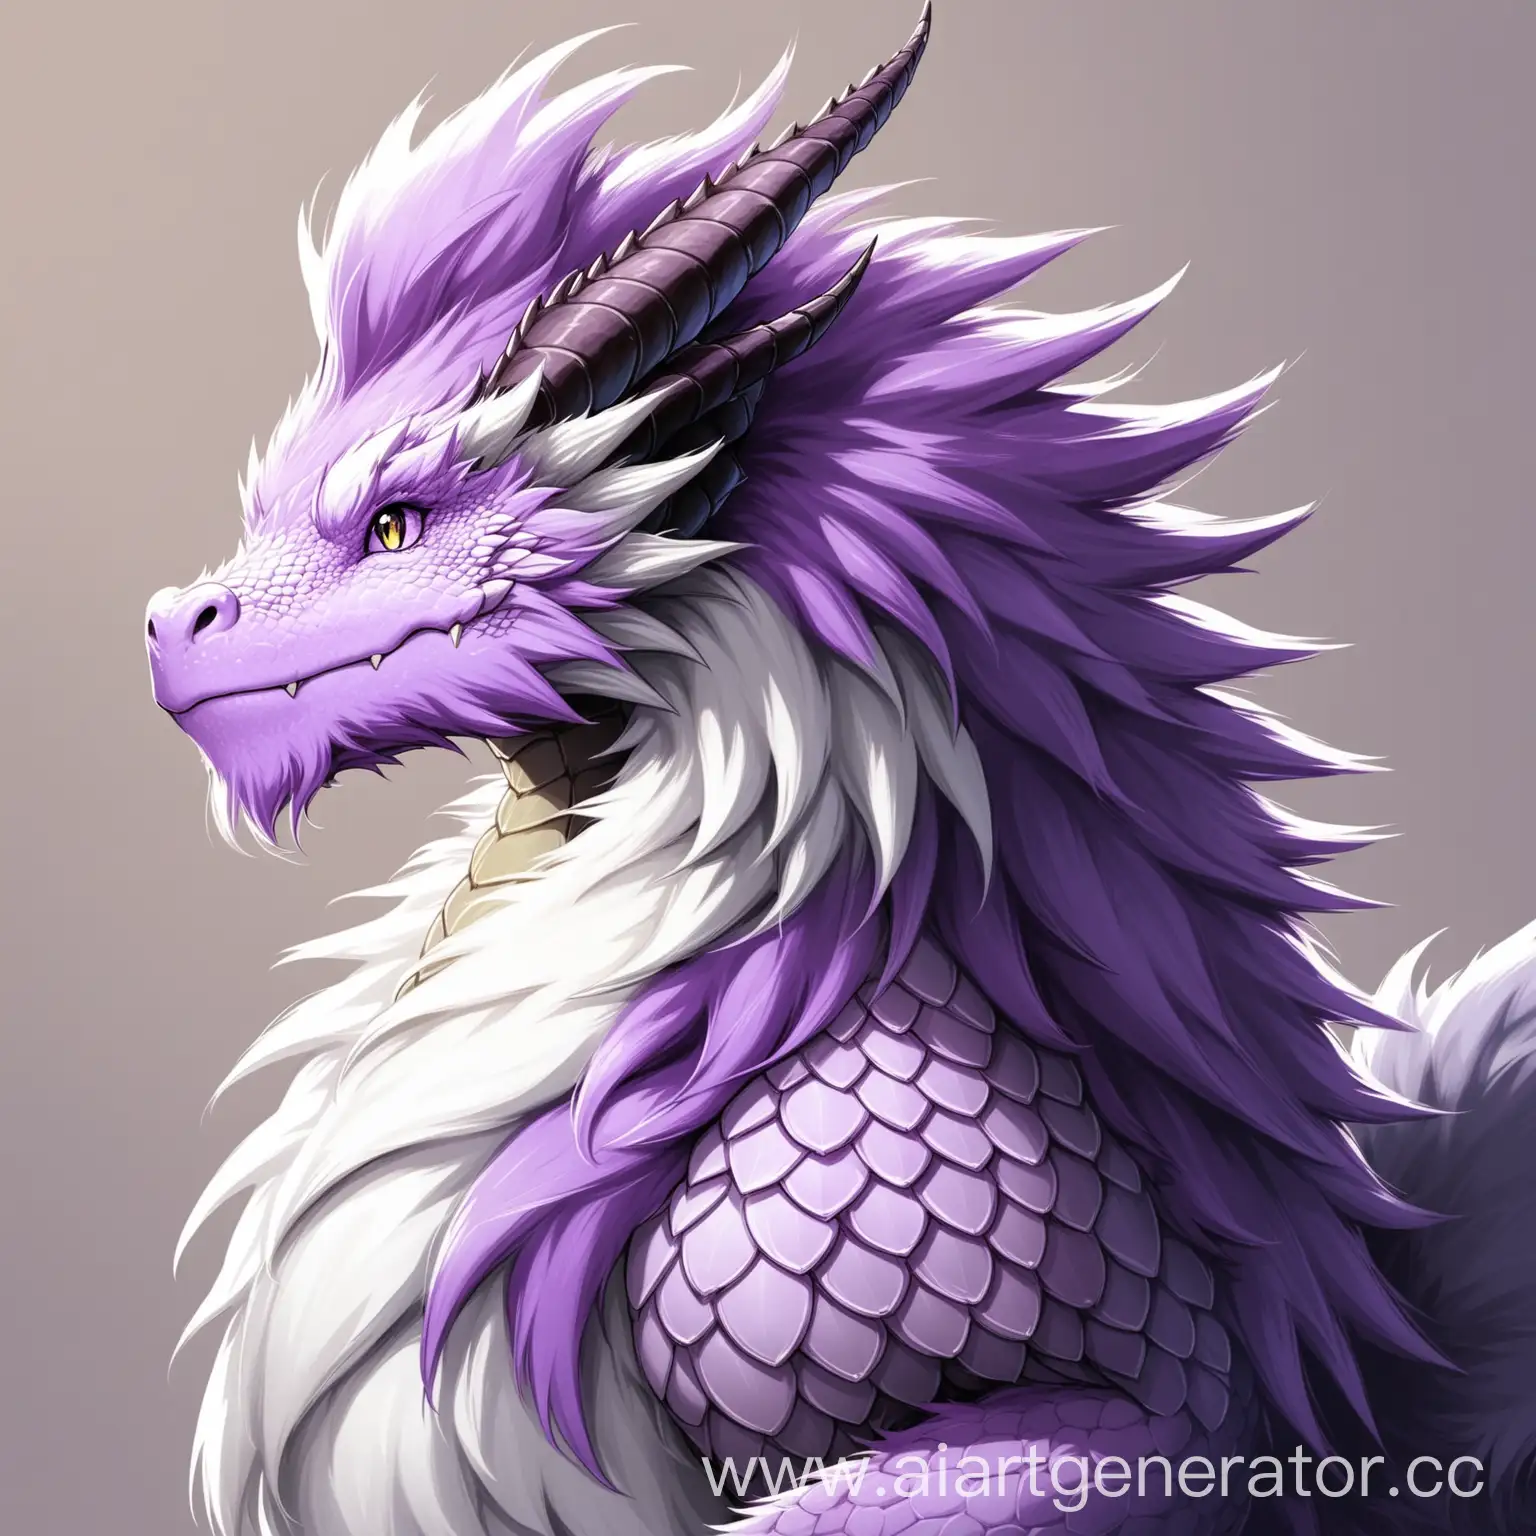 Fluffy-Dragon-with-GreyPurple-Fur-and-Quiff-Hair-in-PurpleWhite-Hue